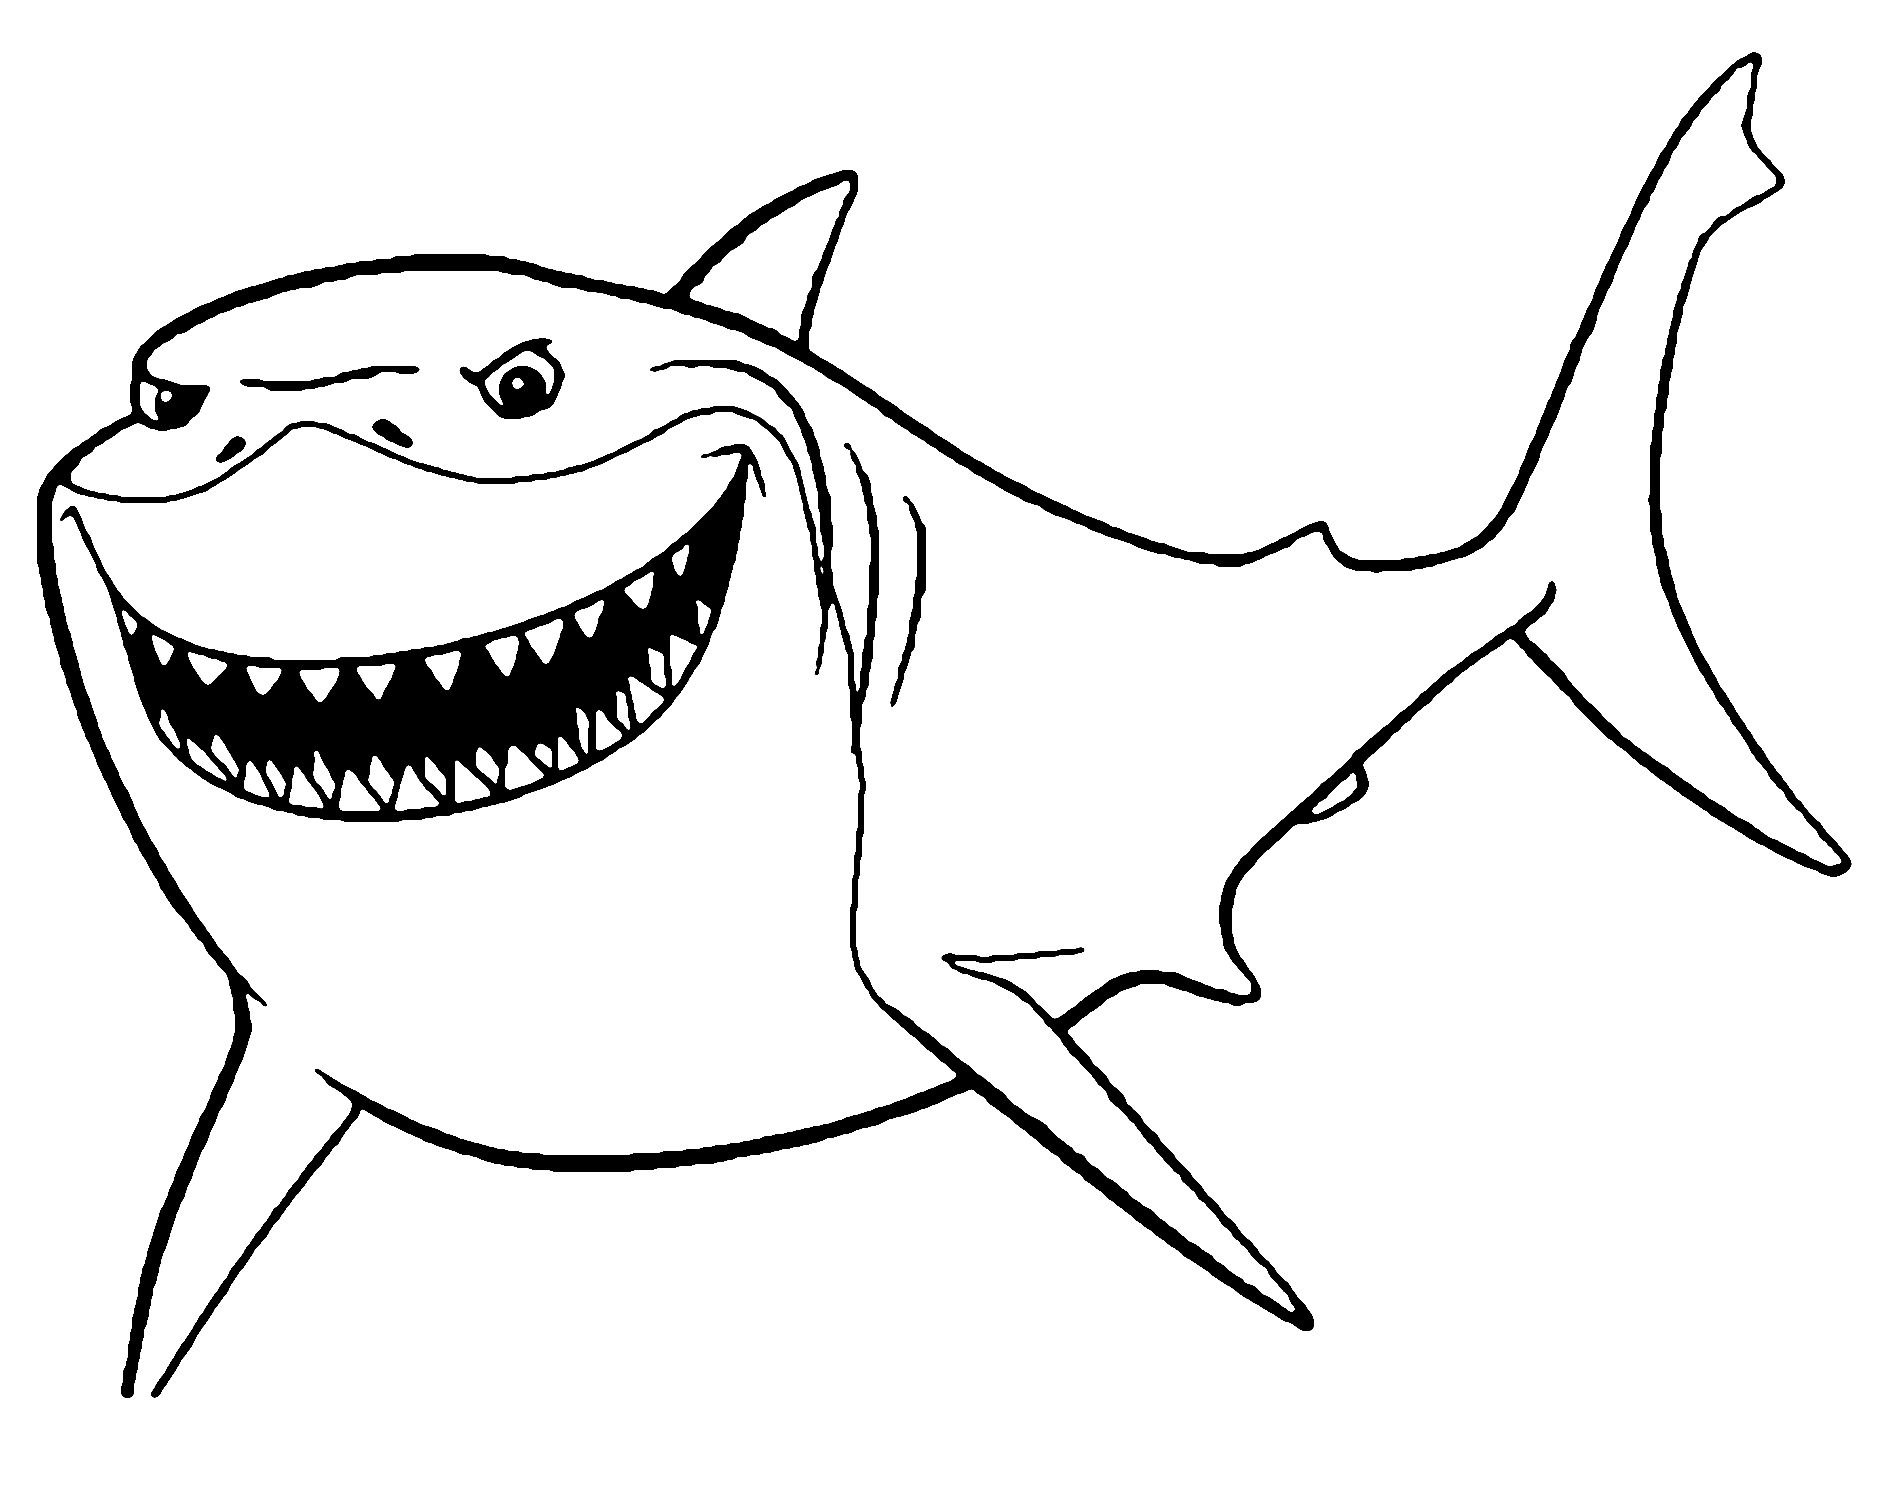 Finding Nemo Shark Bruce Coloring Page